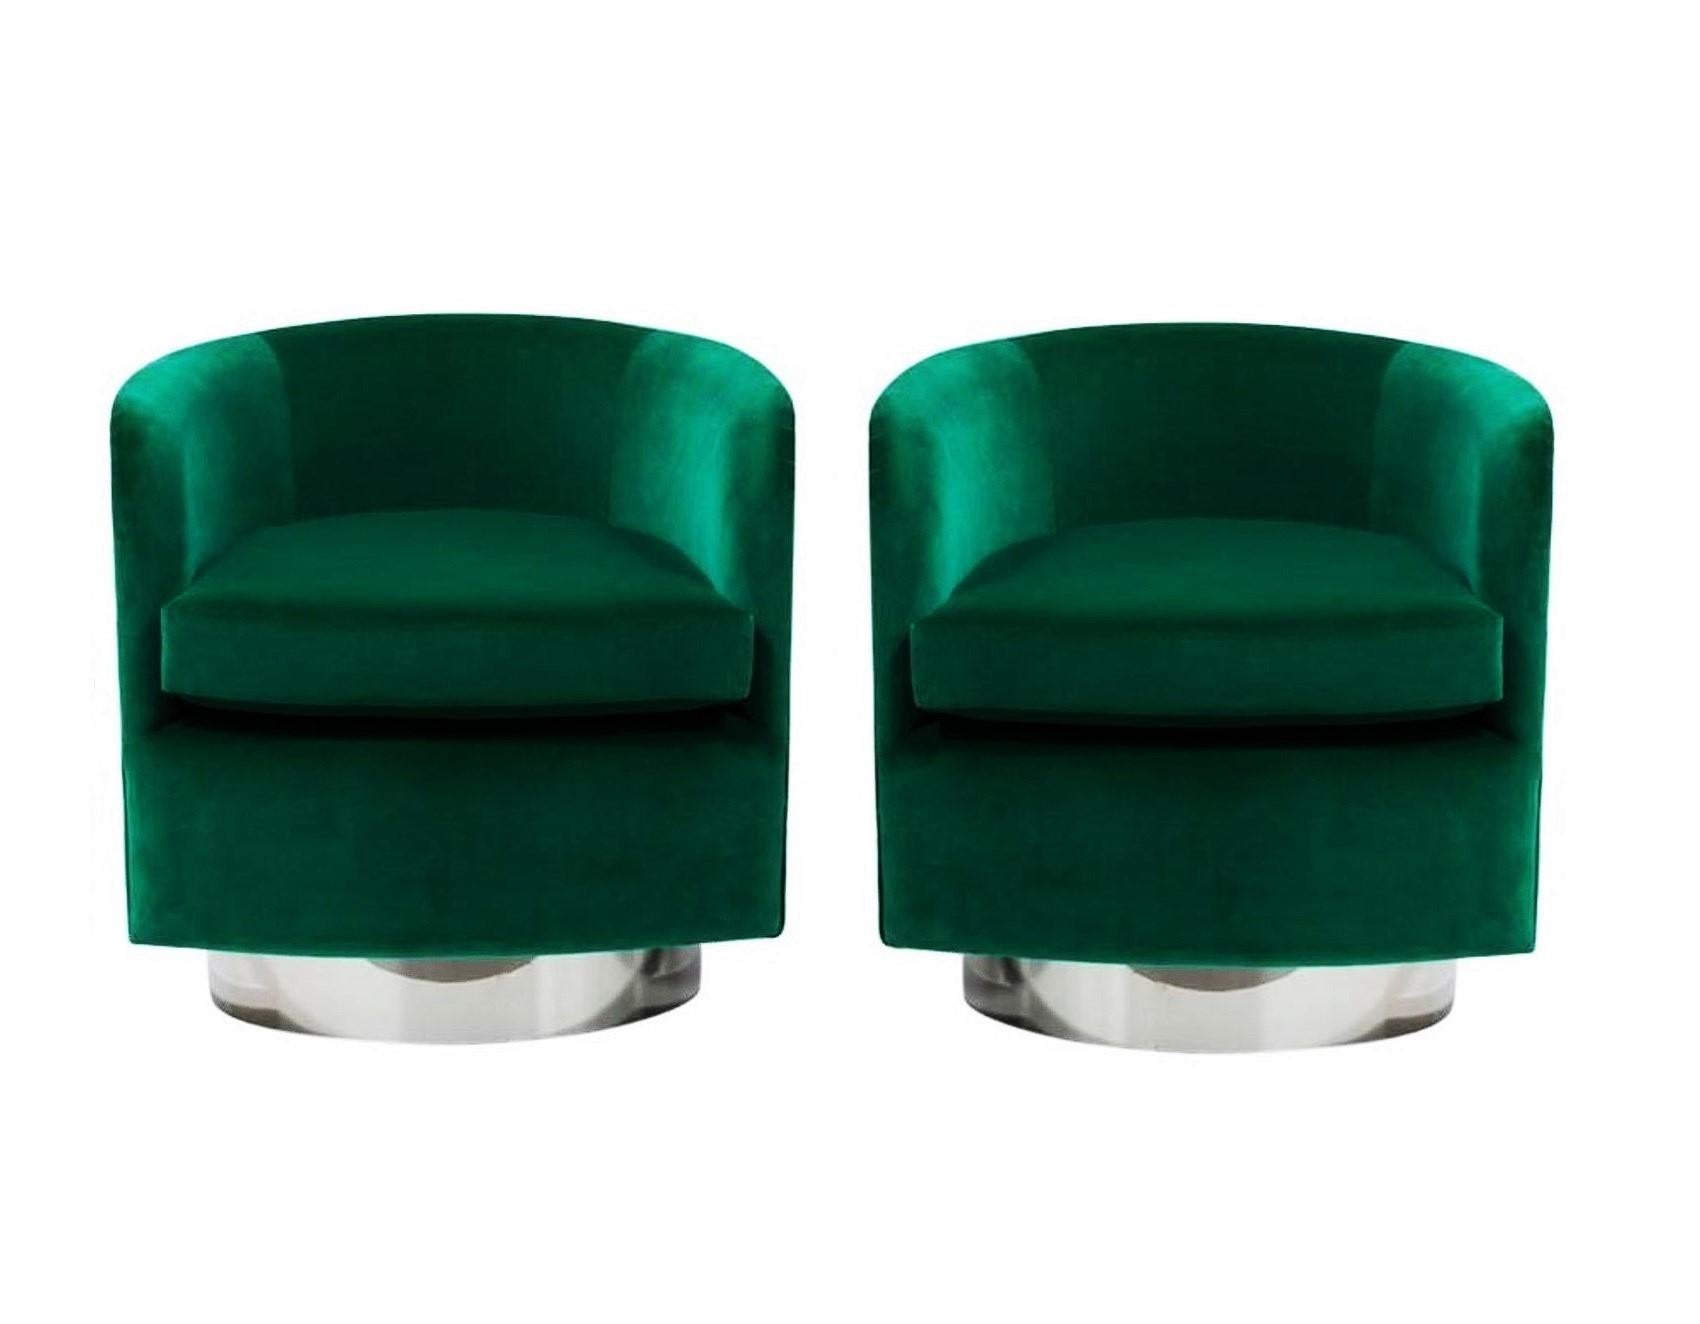 This stunning pair of heirloom quality barrel chairs by Milo Baughman for Thayer Coggin. Super high style, swivel chairs recovered in a luxurious green colored velvet upholstery that contrasts beautifully against the gleaming mirror-finish chrome